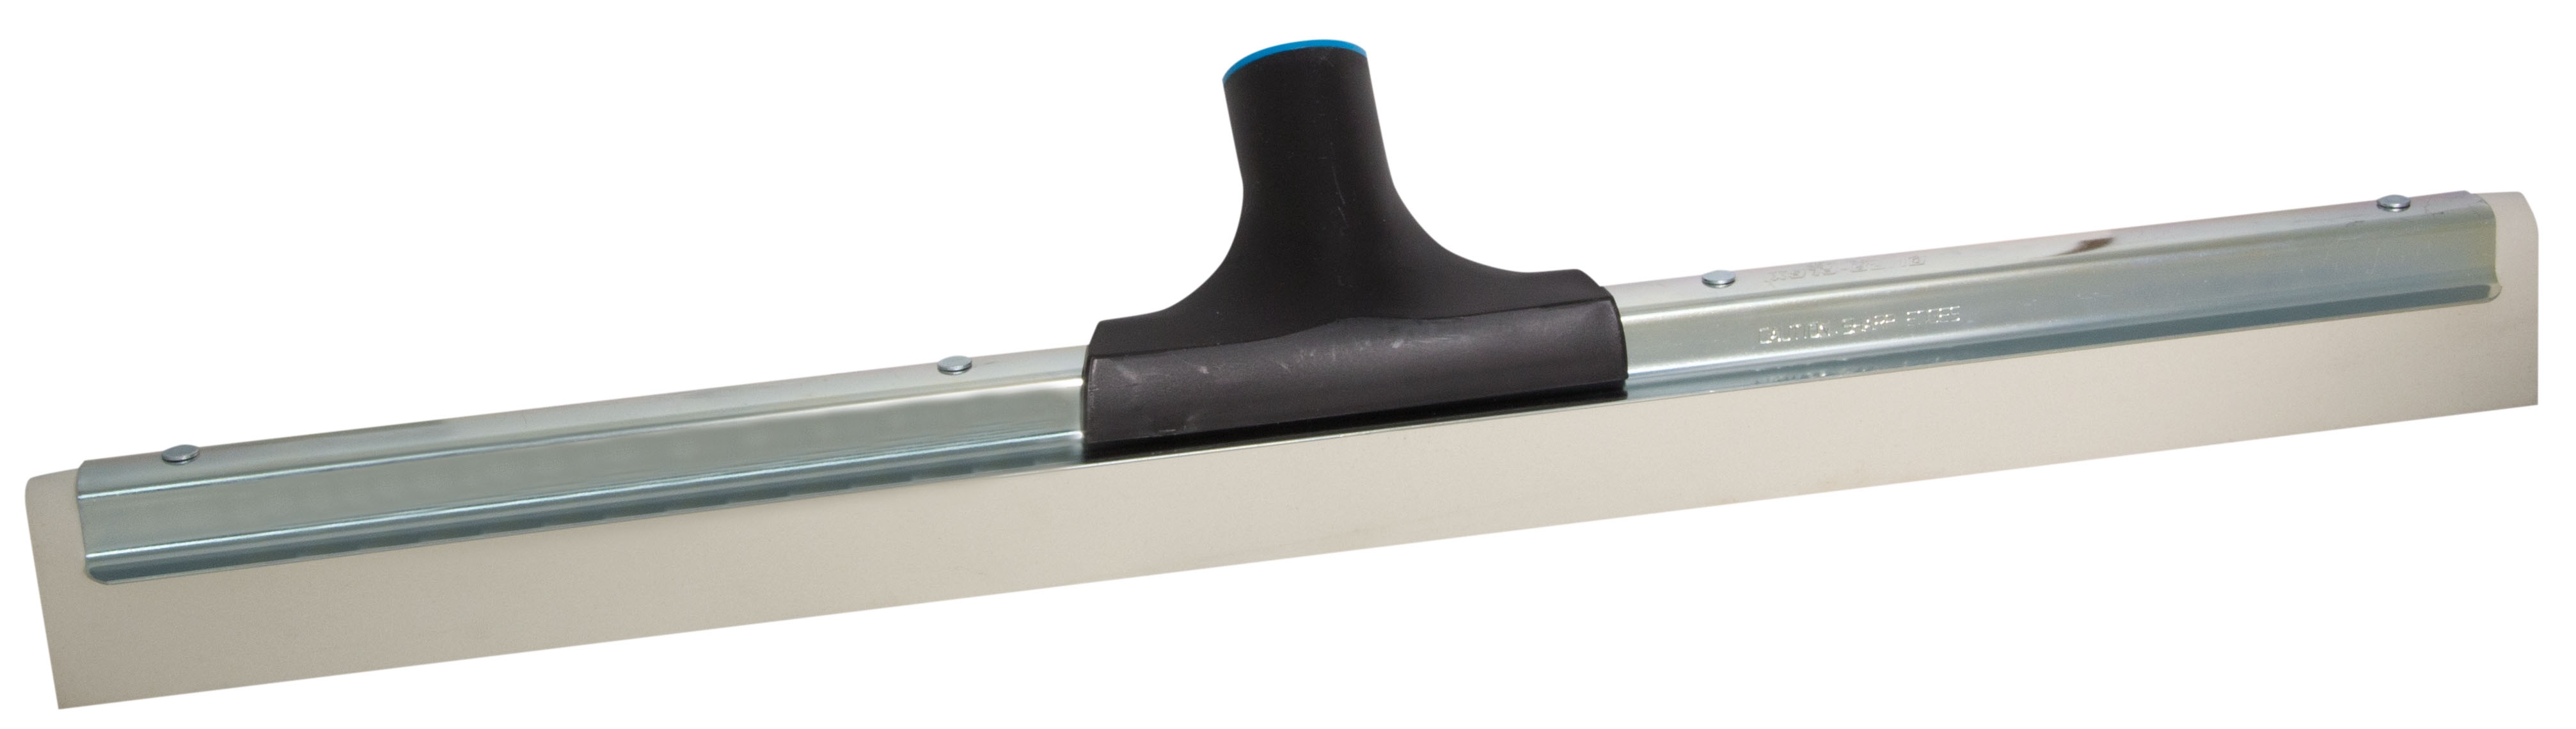 Rubber Squeegee Hybrid